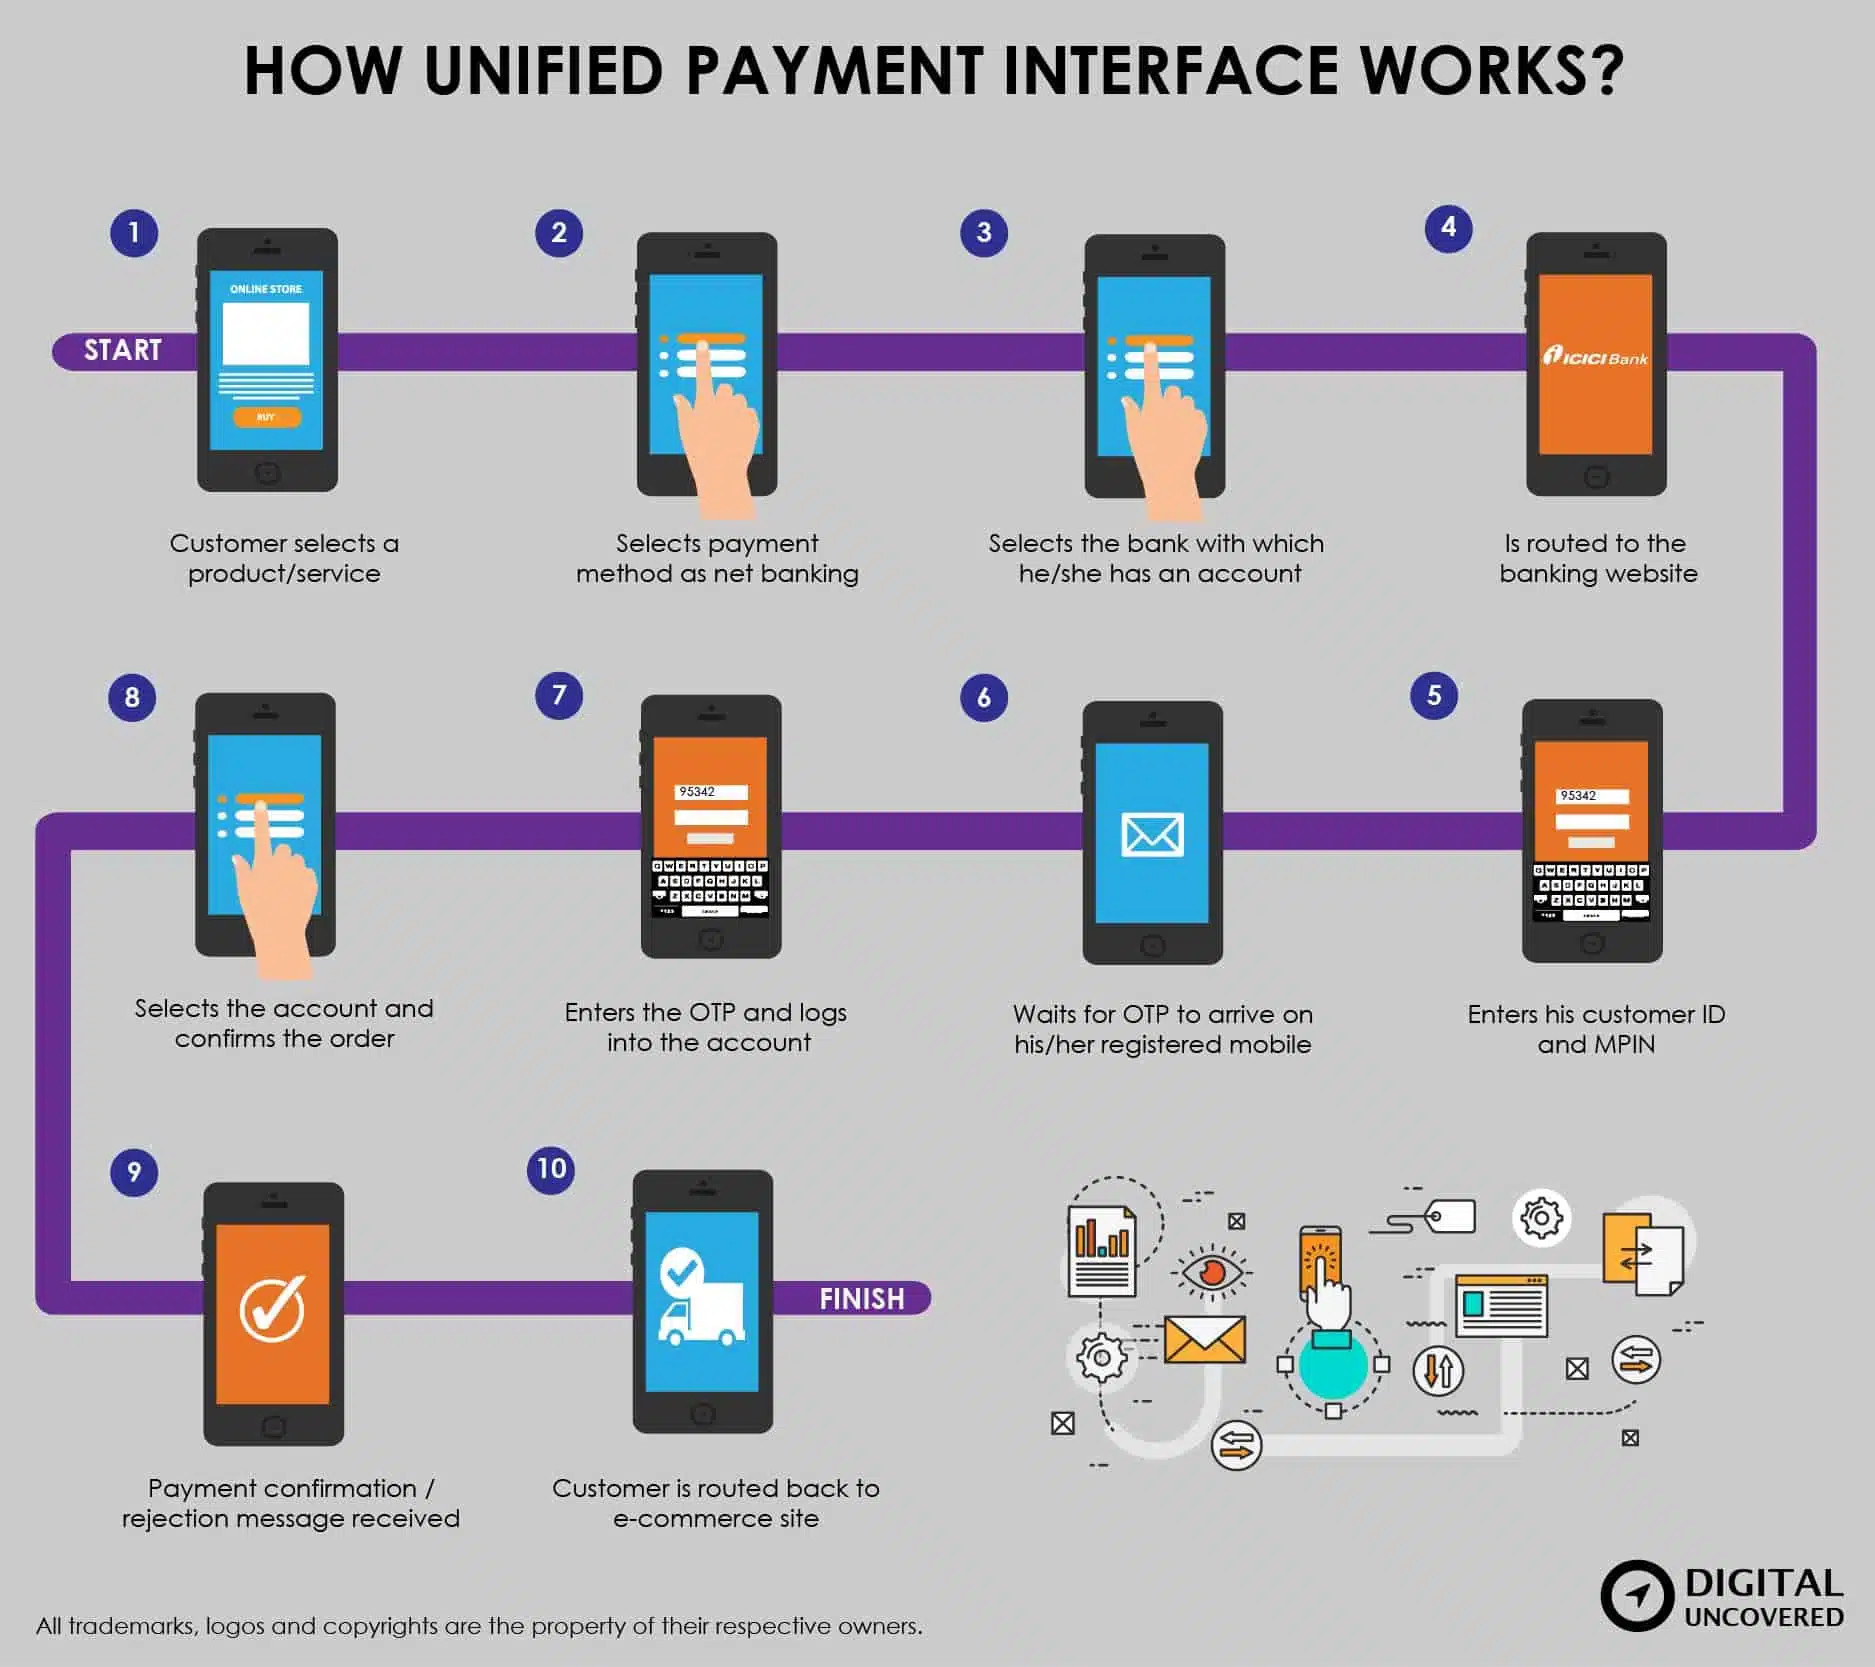 Unified-Payment-Interface-Works